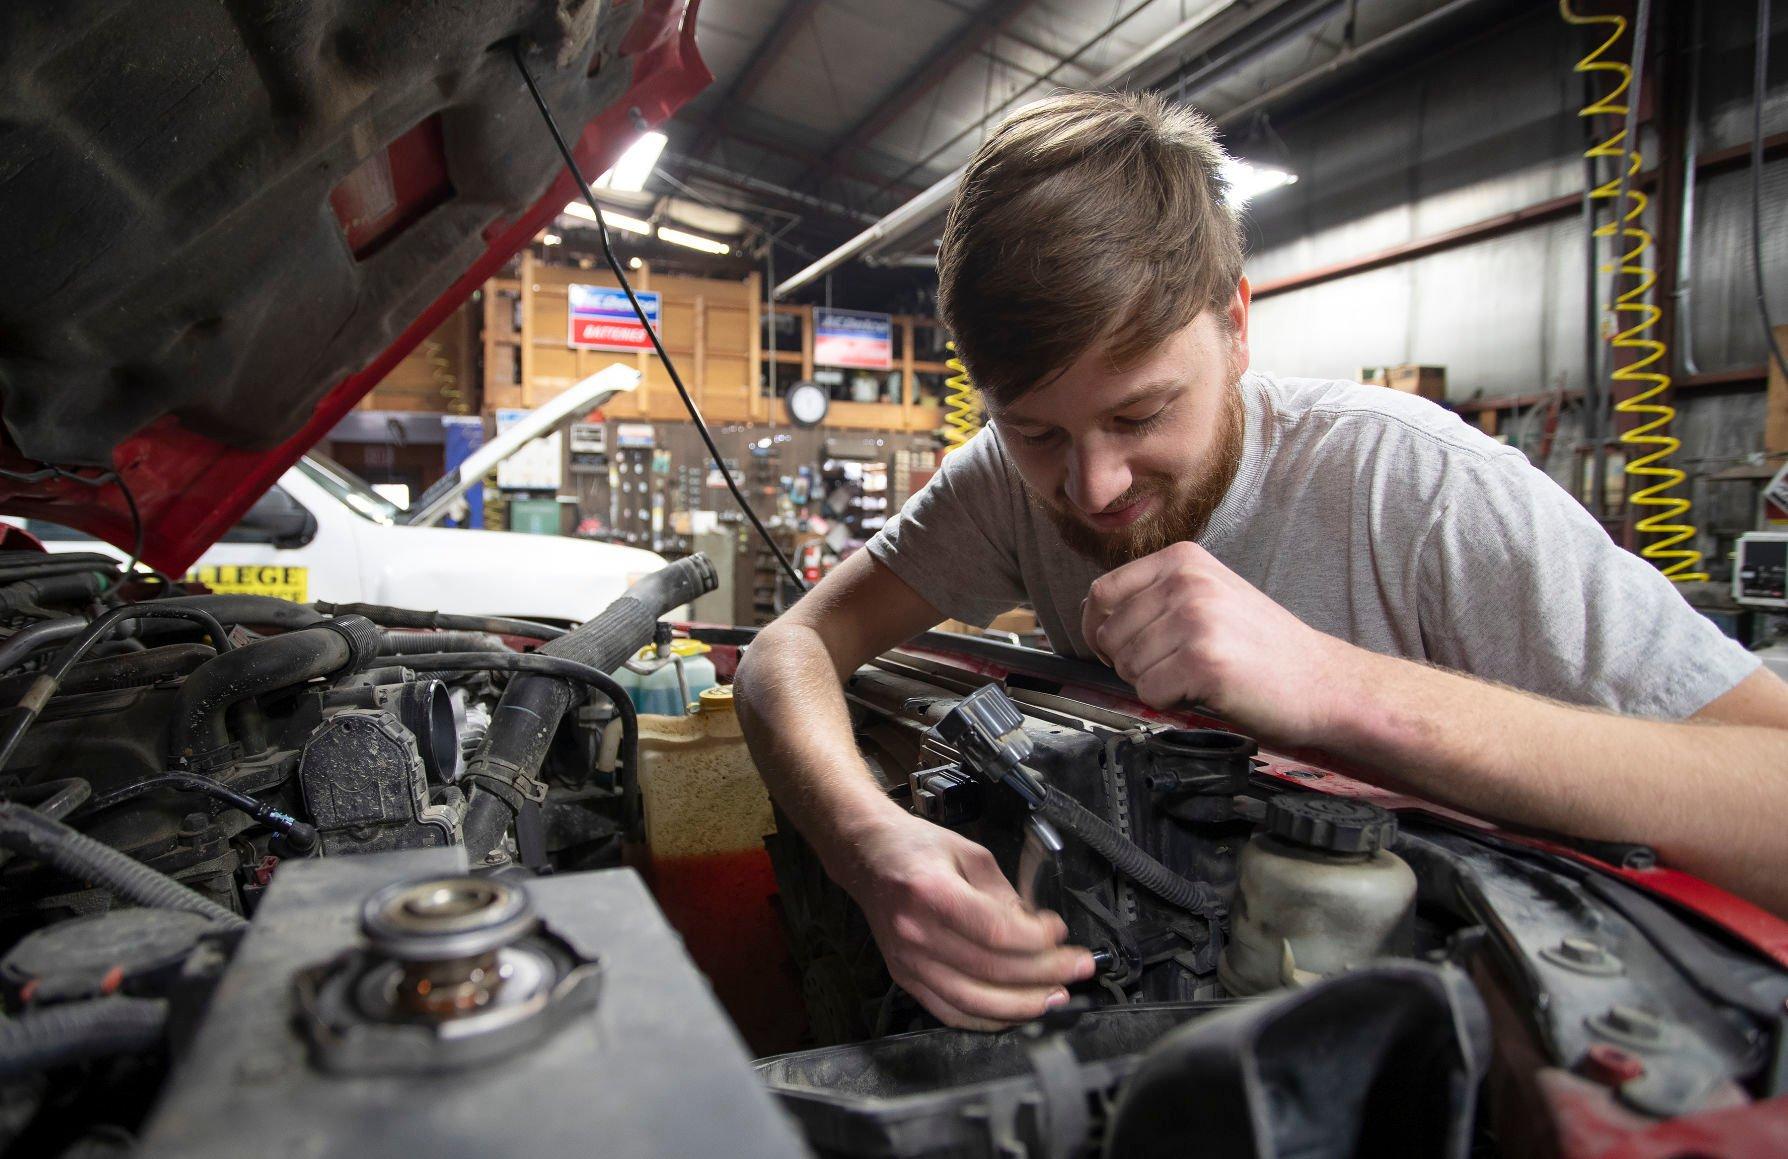 Sheehan Auto’s new owner Luke Steele works on a car Monday in his shop on Desoto Avenue in East Dubuque, Ill.    PHOTO CREDIT: Stephen Gassman